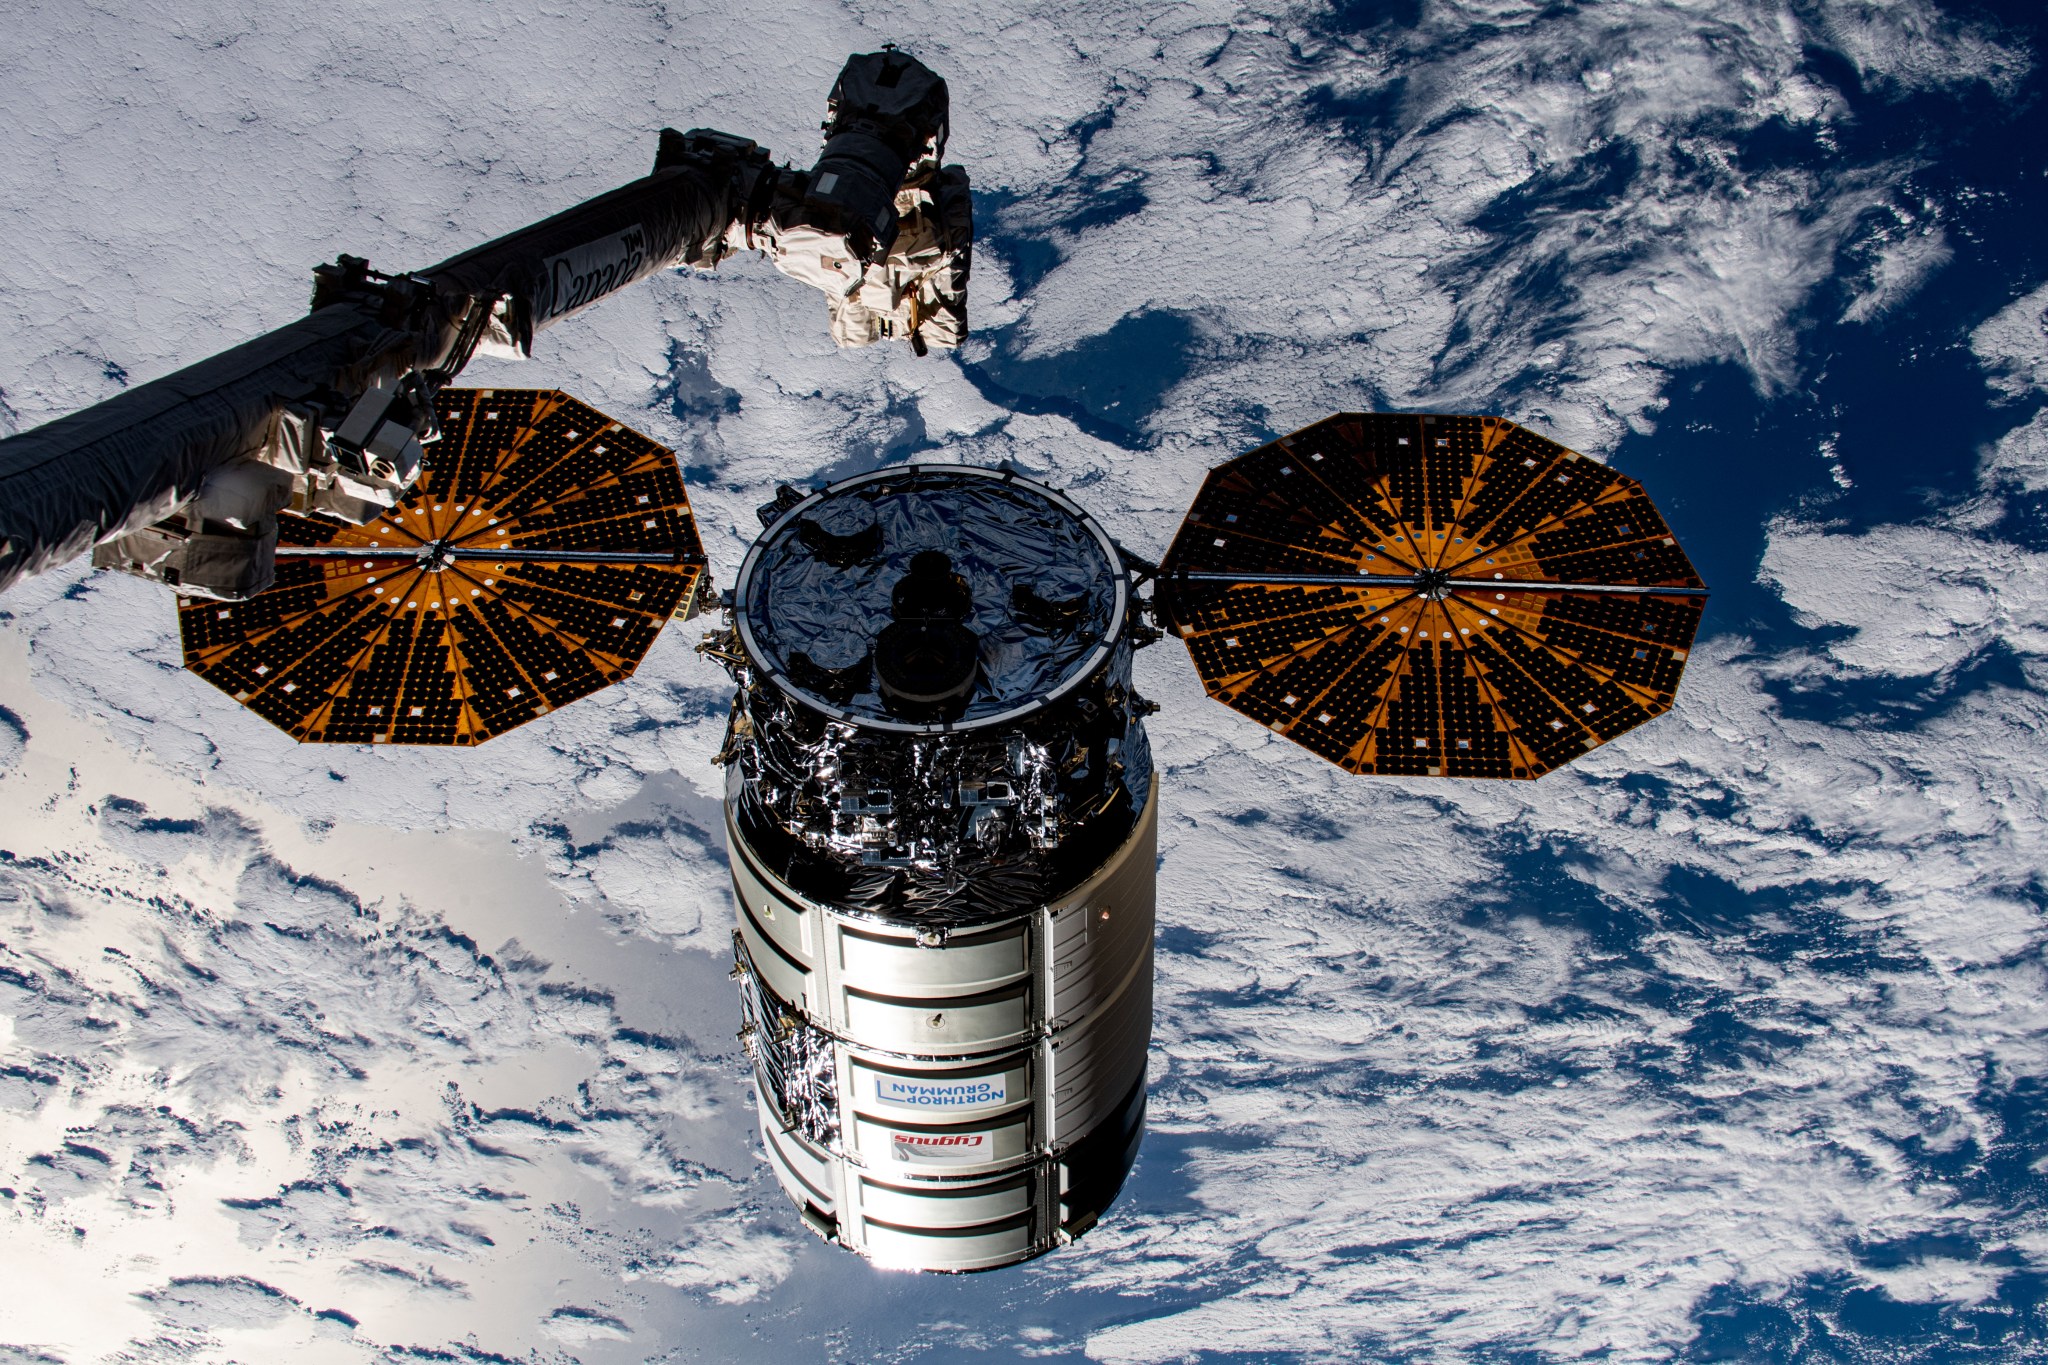 Northrop Grumman's Cygnus cargo craft is pictured moments away from being captured by the Canadarm2 robotic arm controlled by NASA astronaut and Expedition 69 Flight Engineer Woody Hoburg from inside the International Space Station.